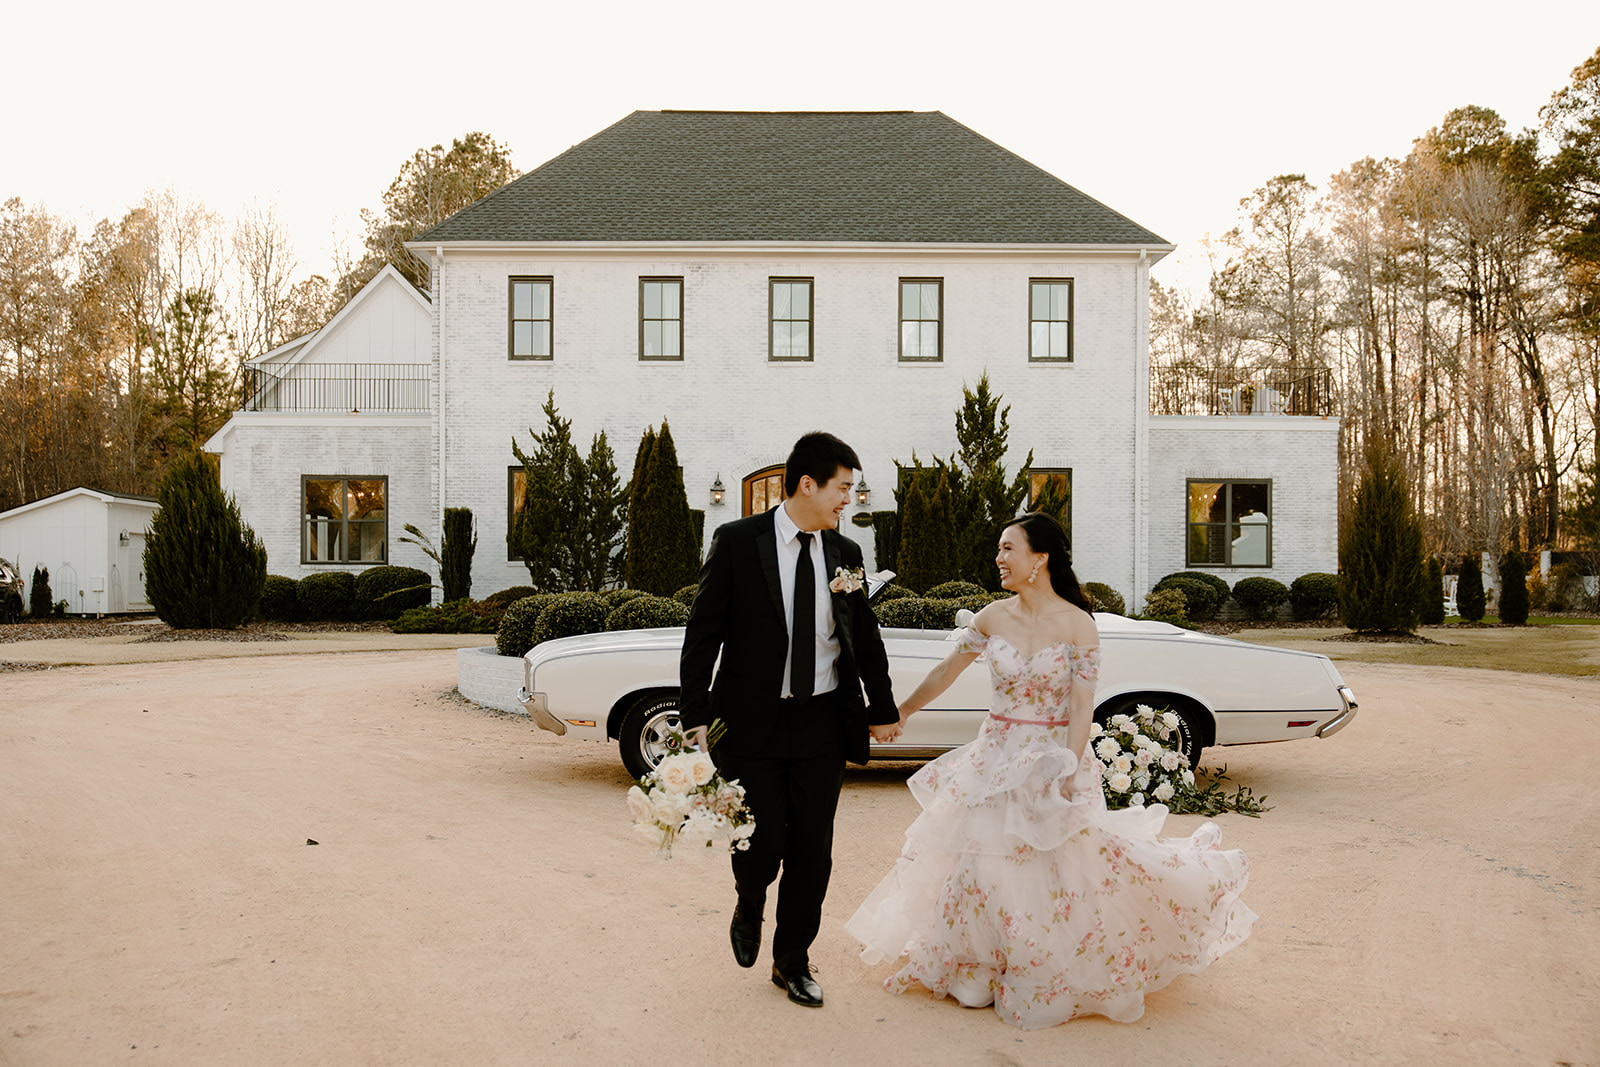 Candid wedding photos with classic car and floral wedding dress.